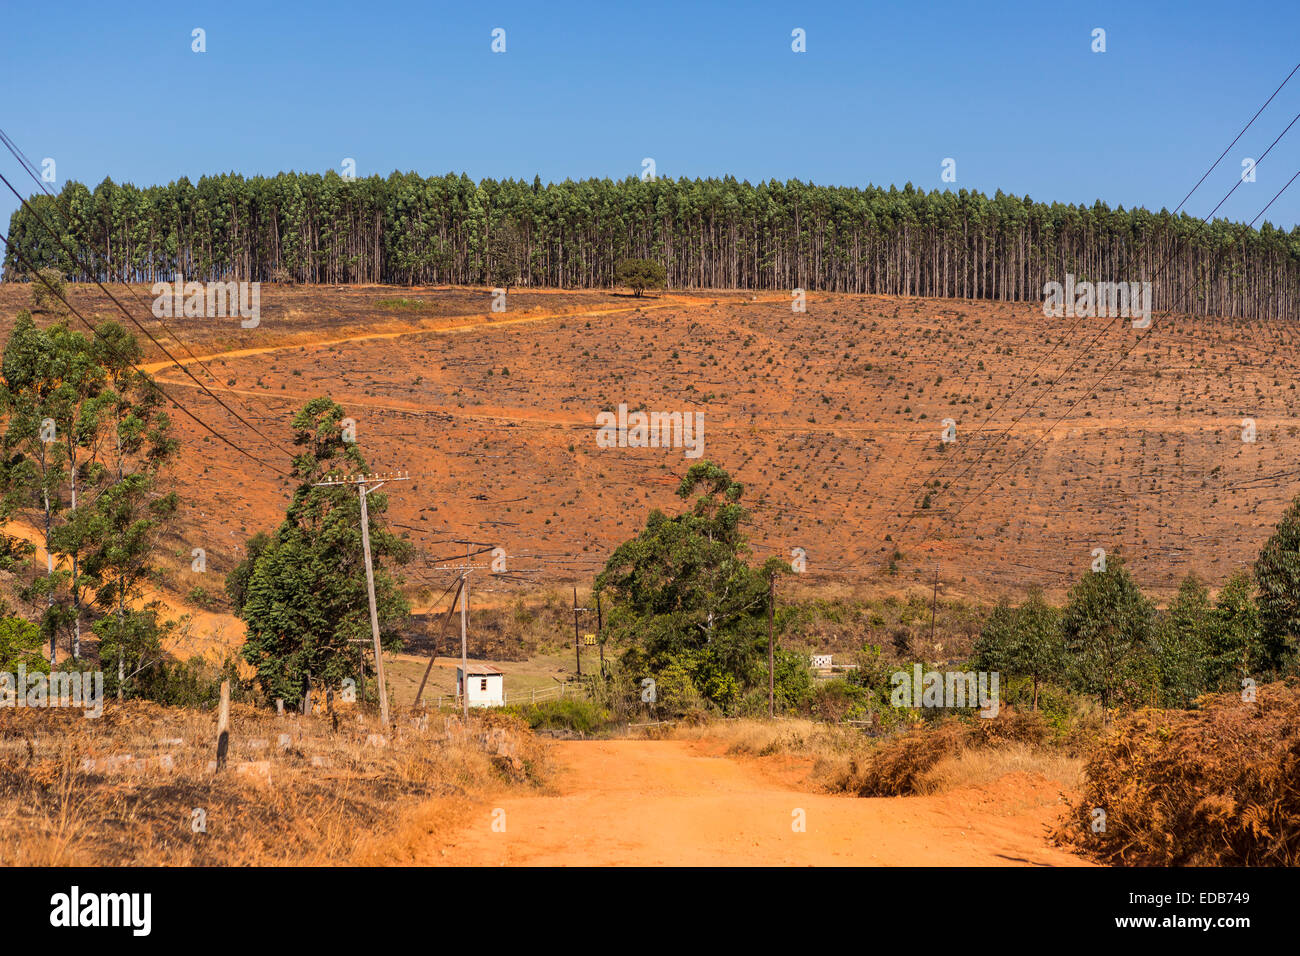 HHOHHO, SWAZILAND, AFRICA - Timber industry landscape, trees and clearcut. Stock Photo